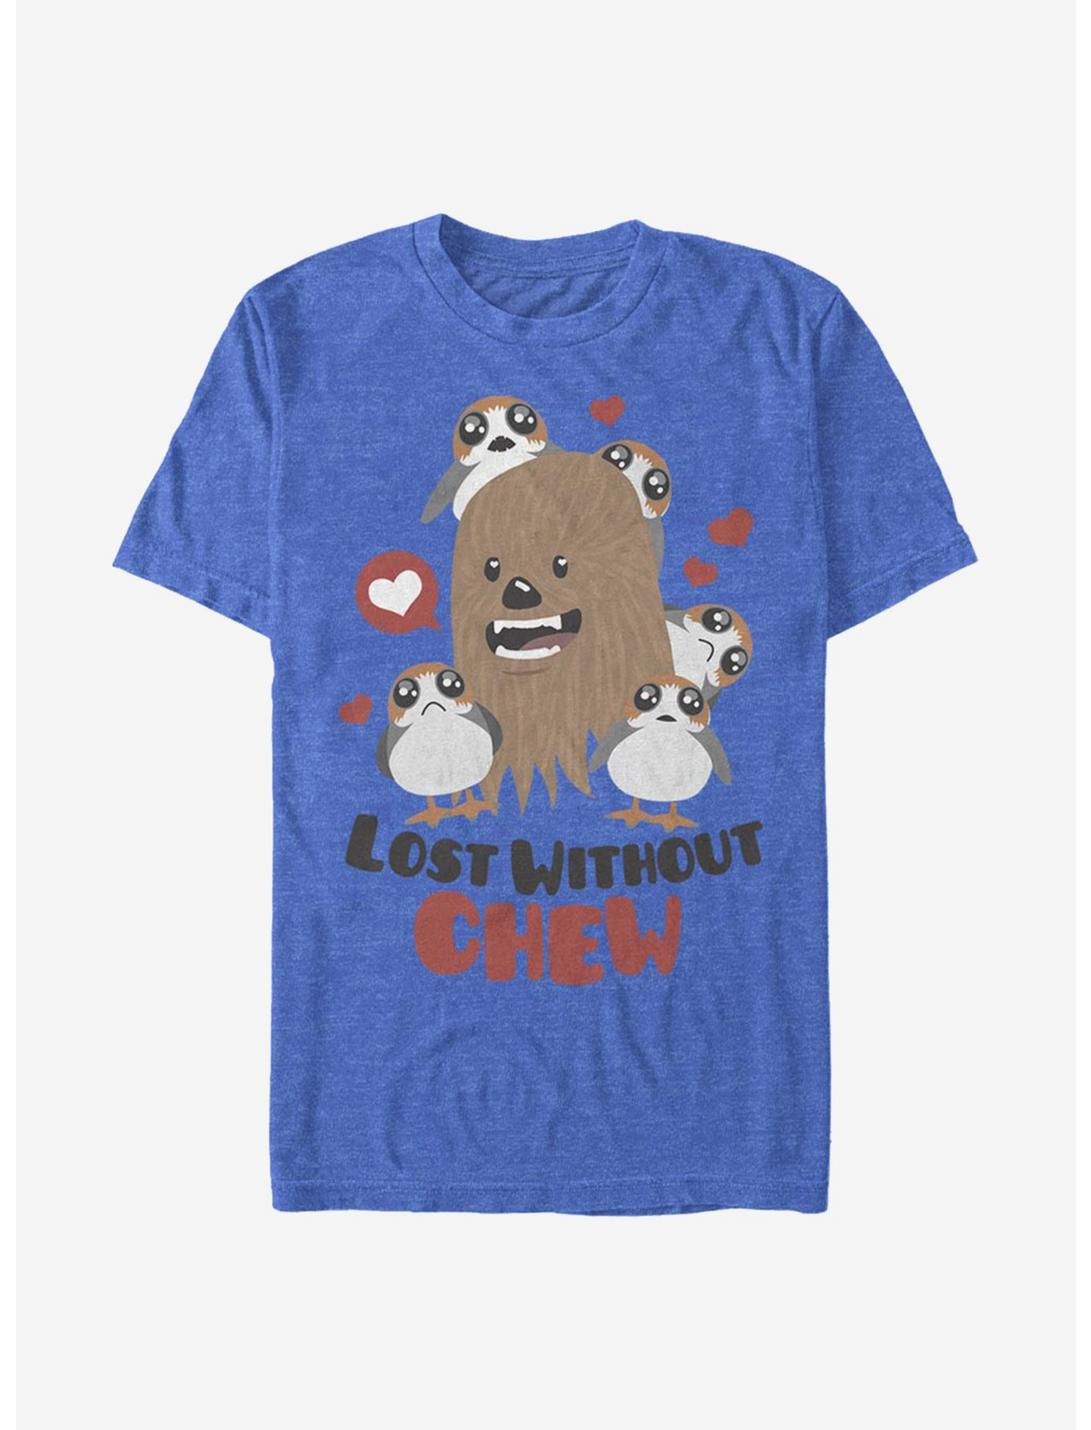 Star Wars Episode VIII The Last Jedi Lost Without Chew T-Shirt, , hi-res